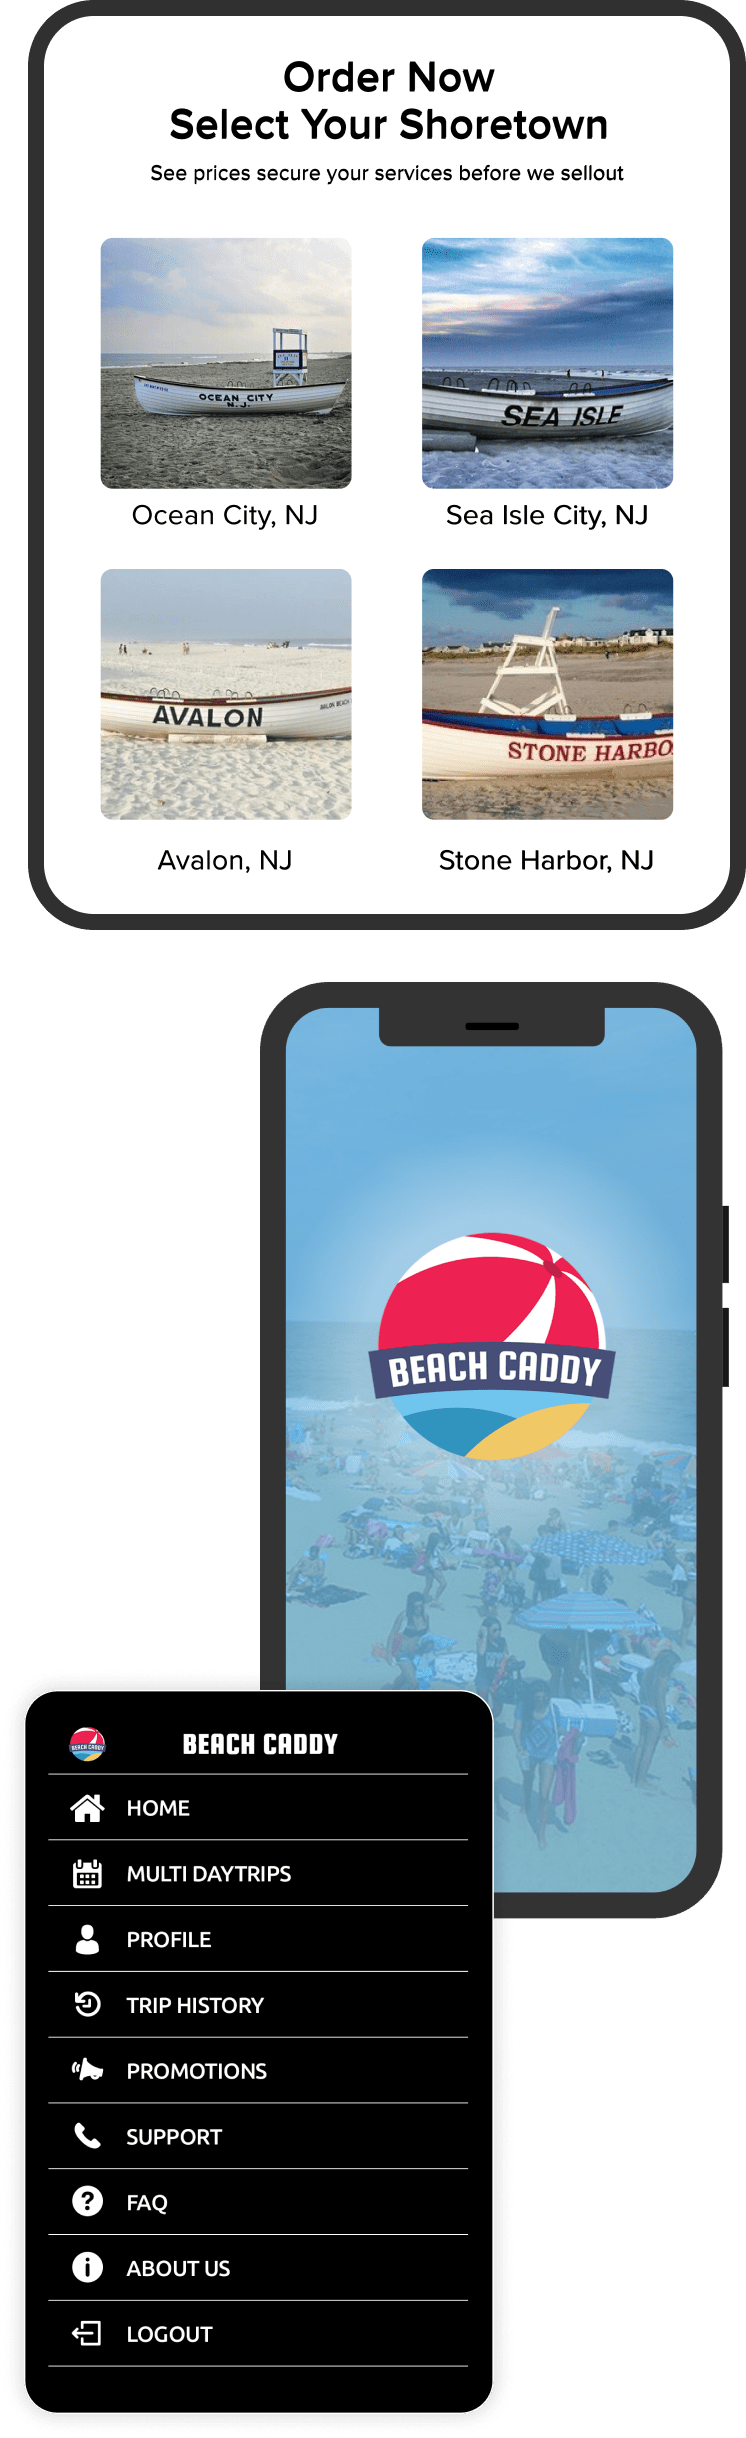 Beachcaddy overview